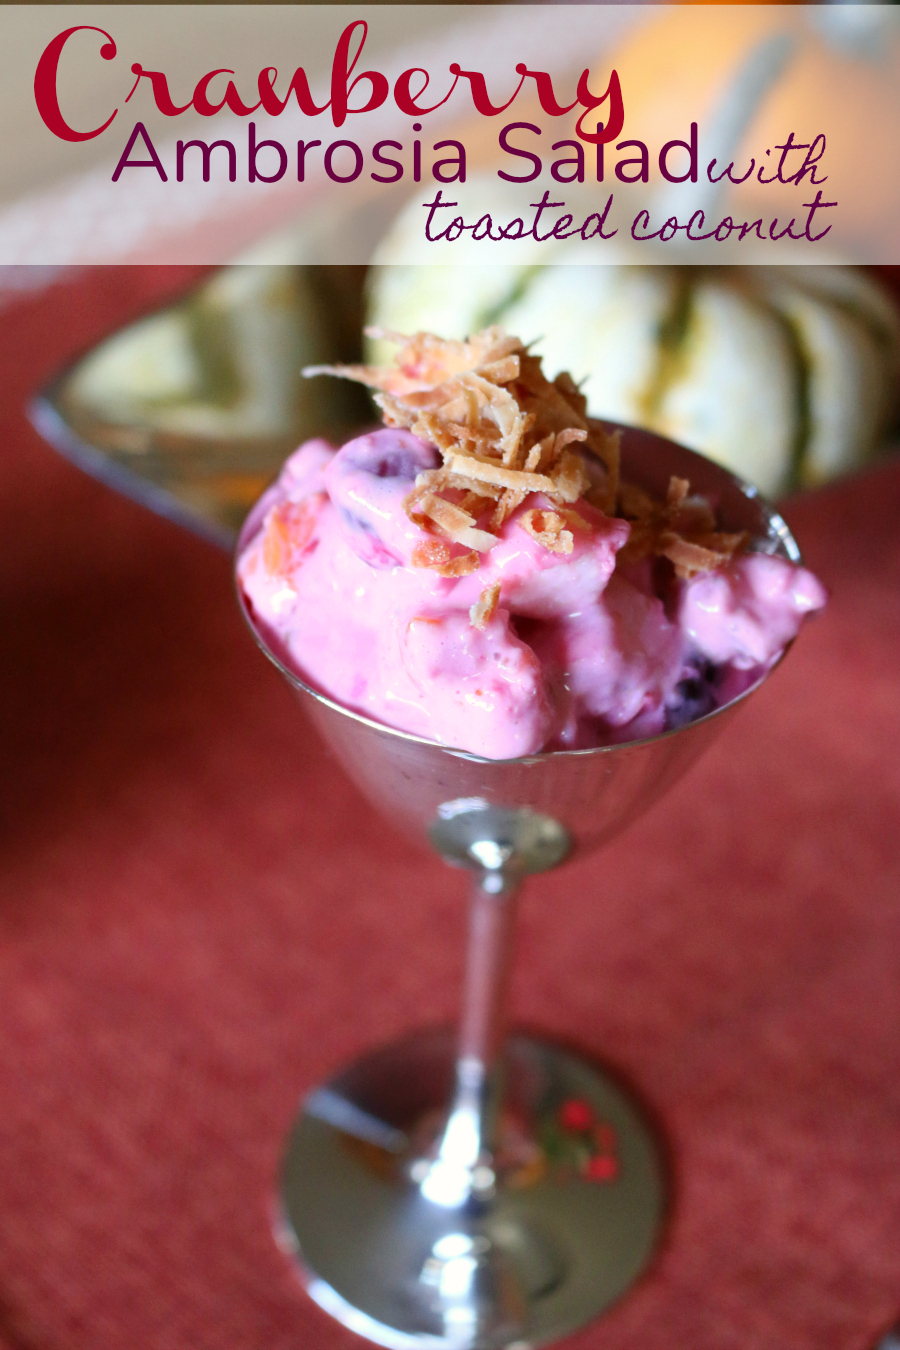 Cranberry Ambrosia Salad with Toasted Coconut Dessert Recipe | CeceliasGoodStuff.com | Good Food for Good People